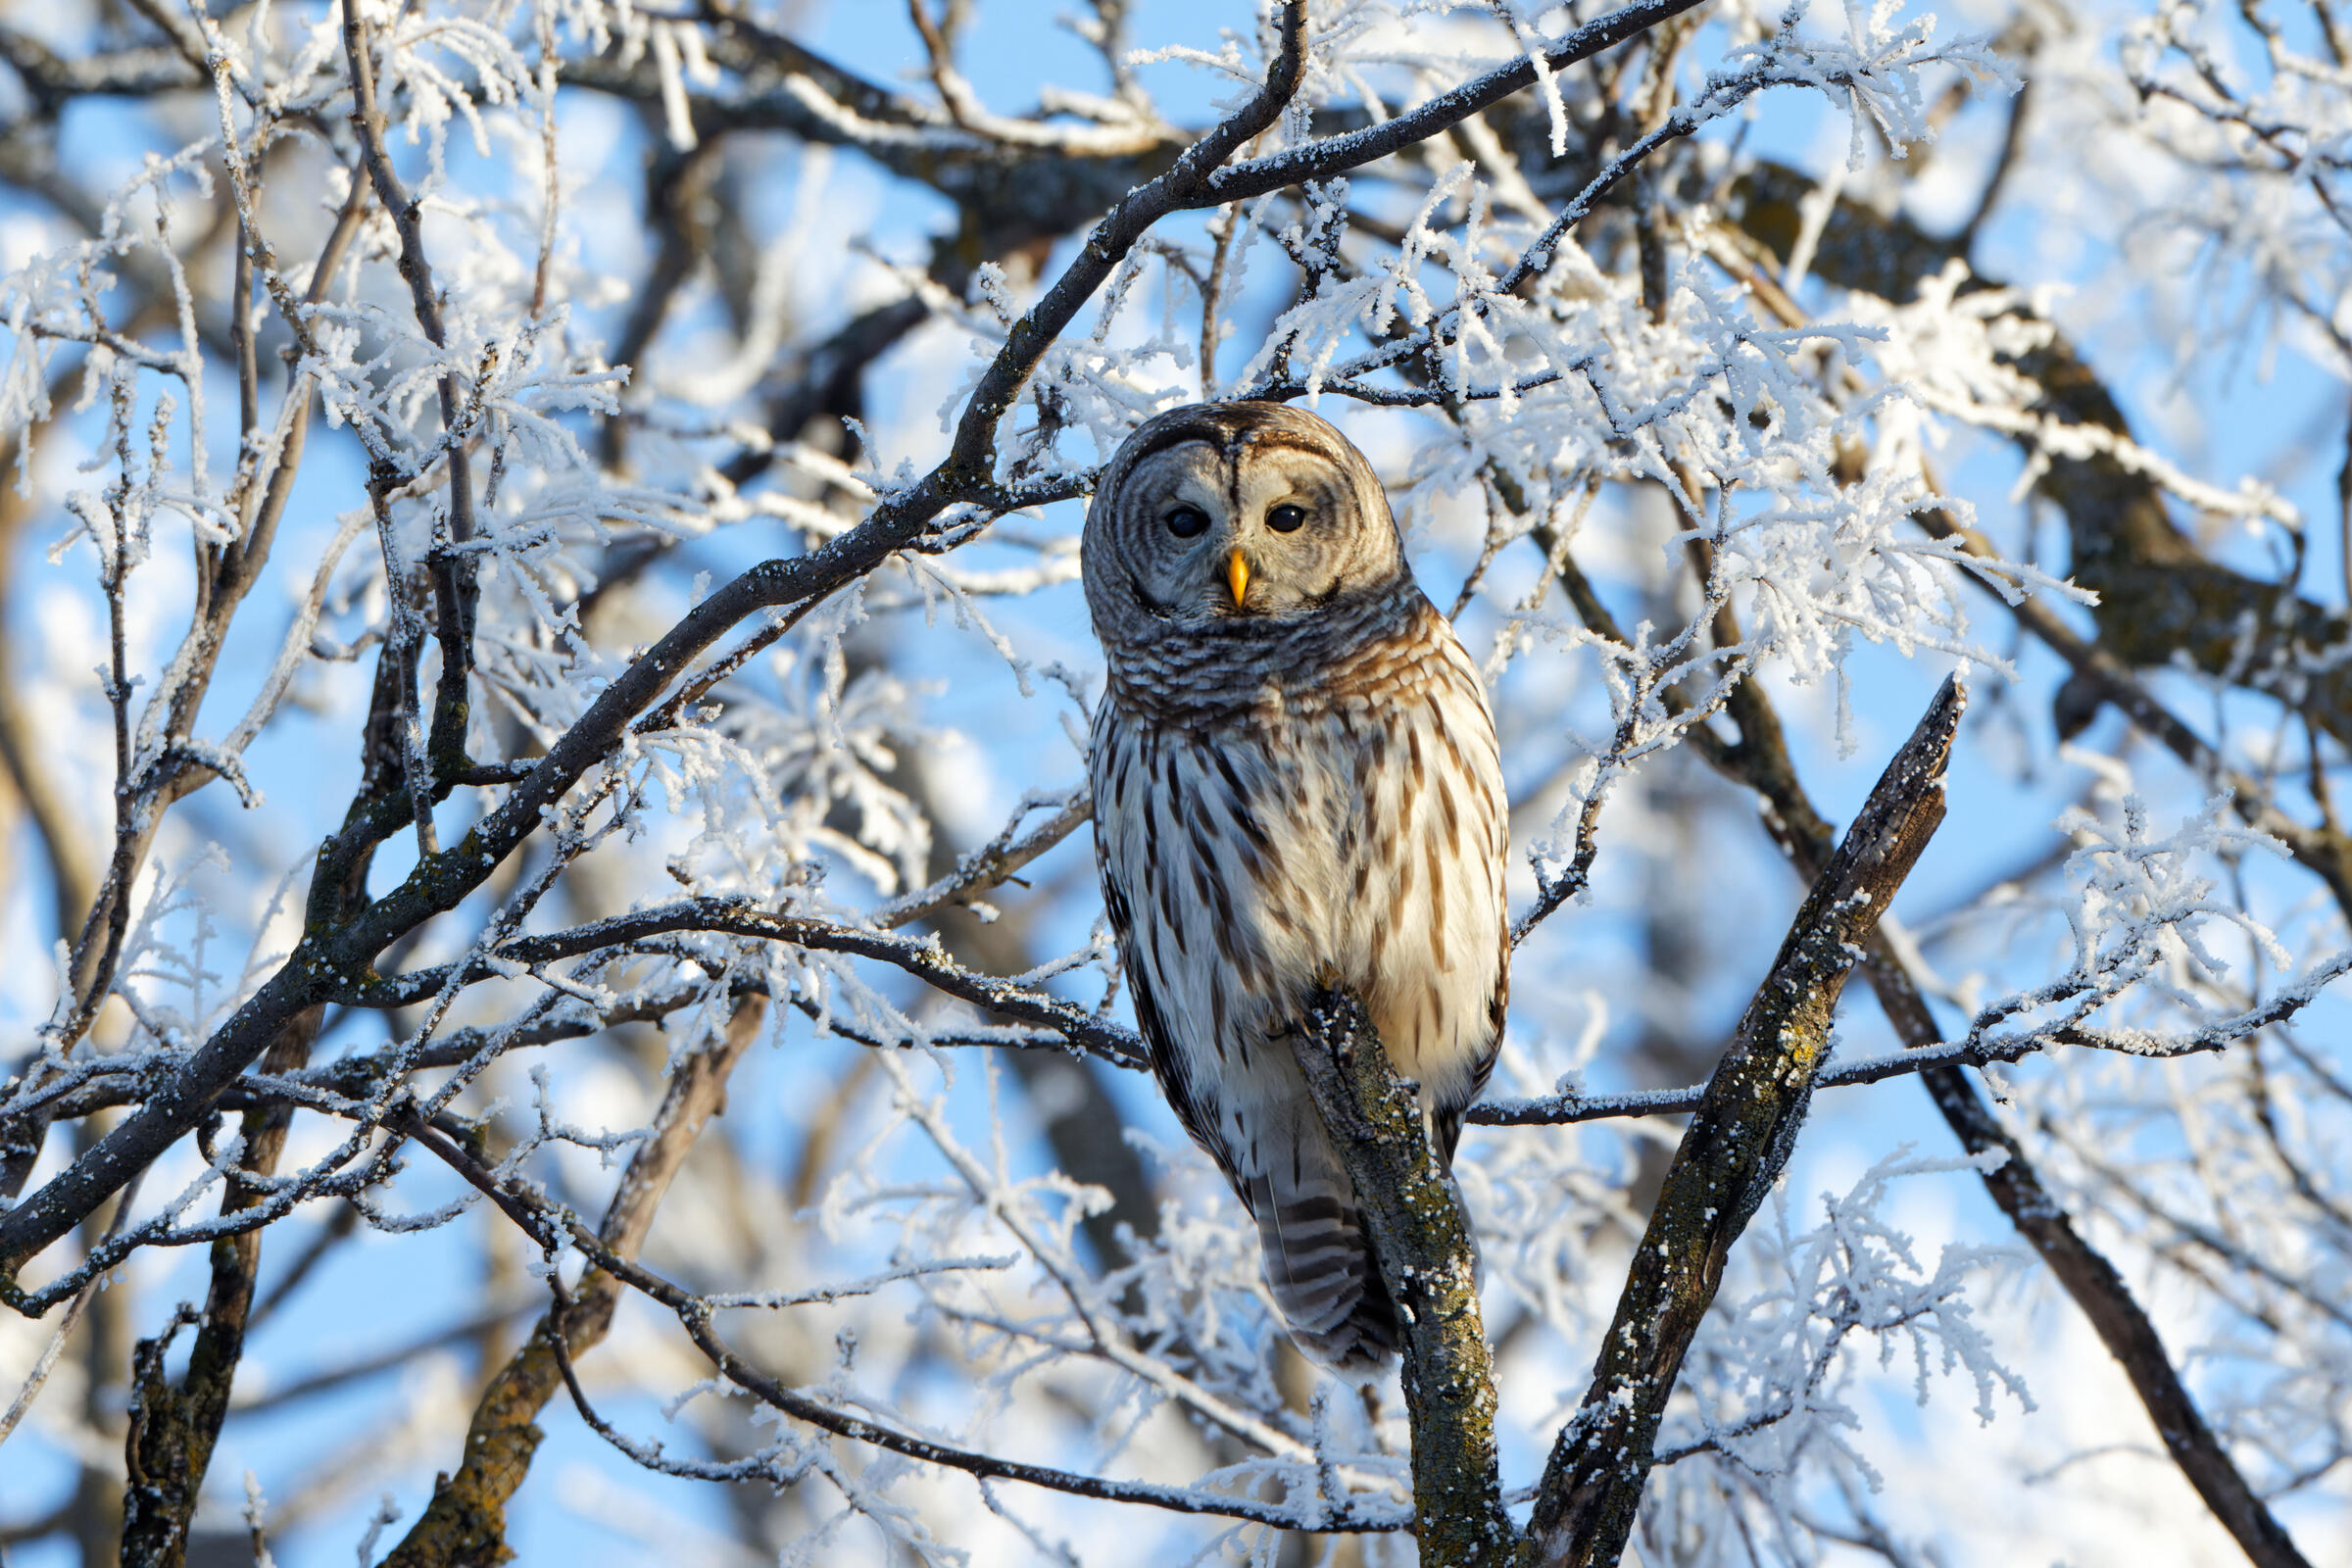 A Barred Owl rest on a snow-covered tree.